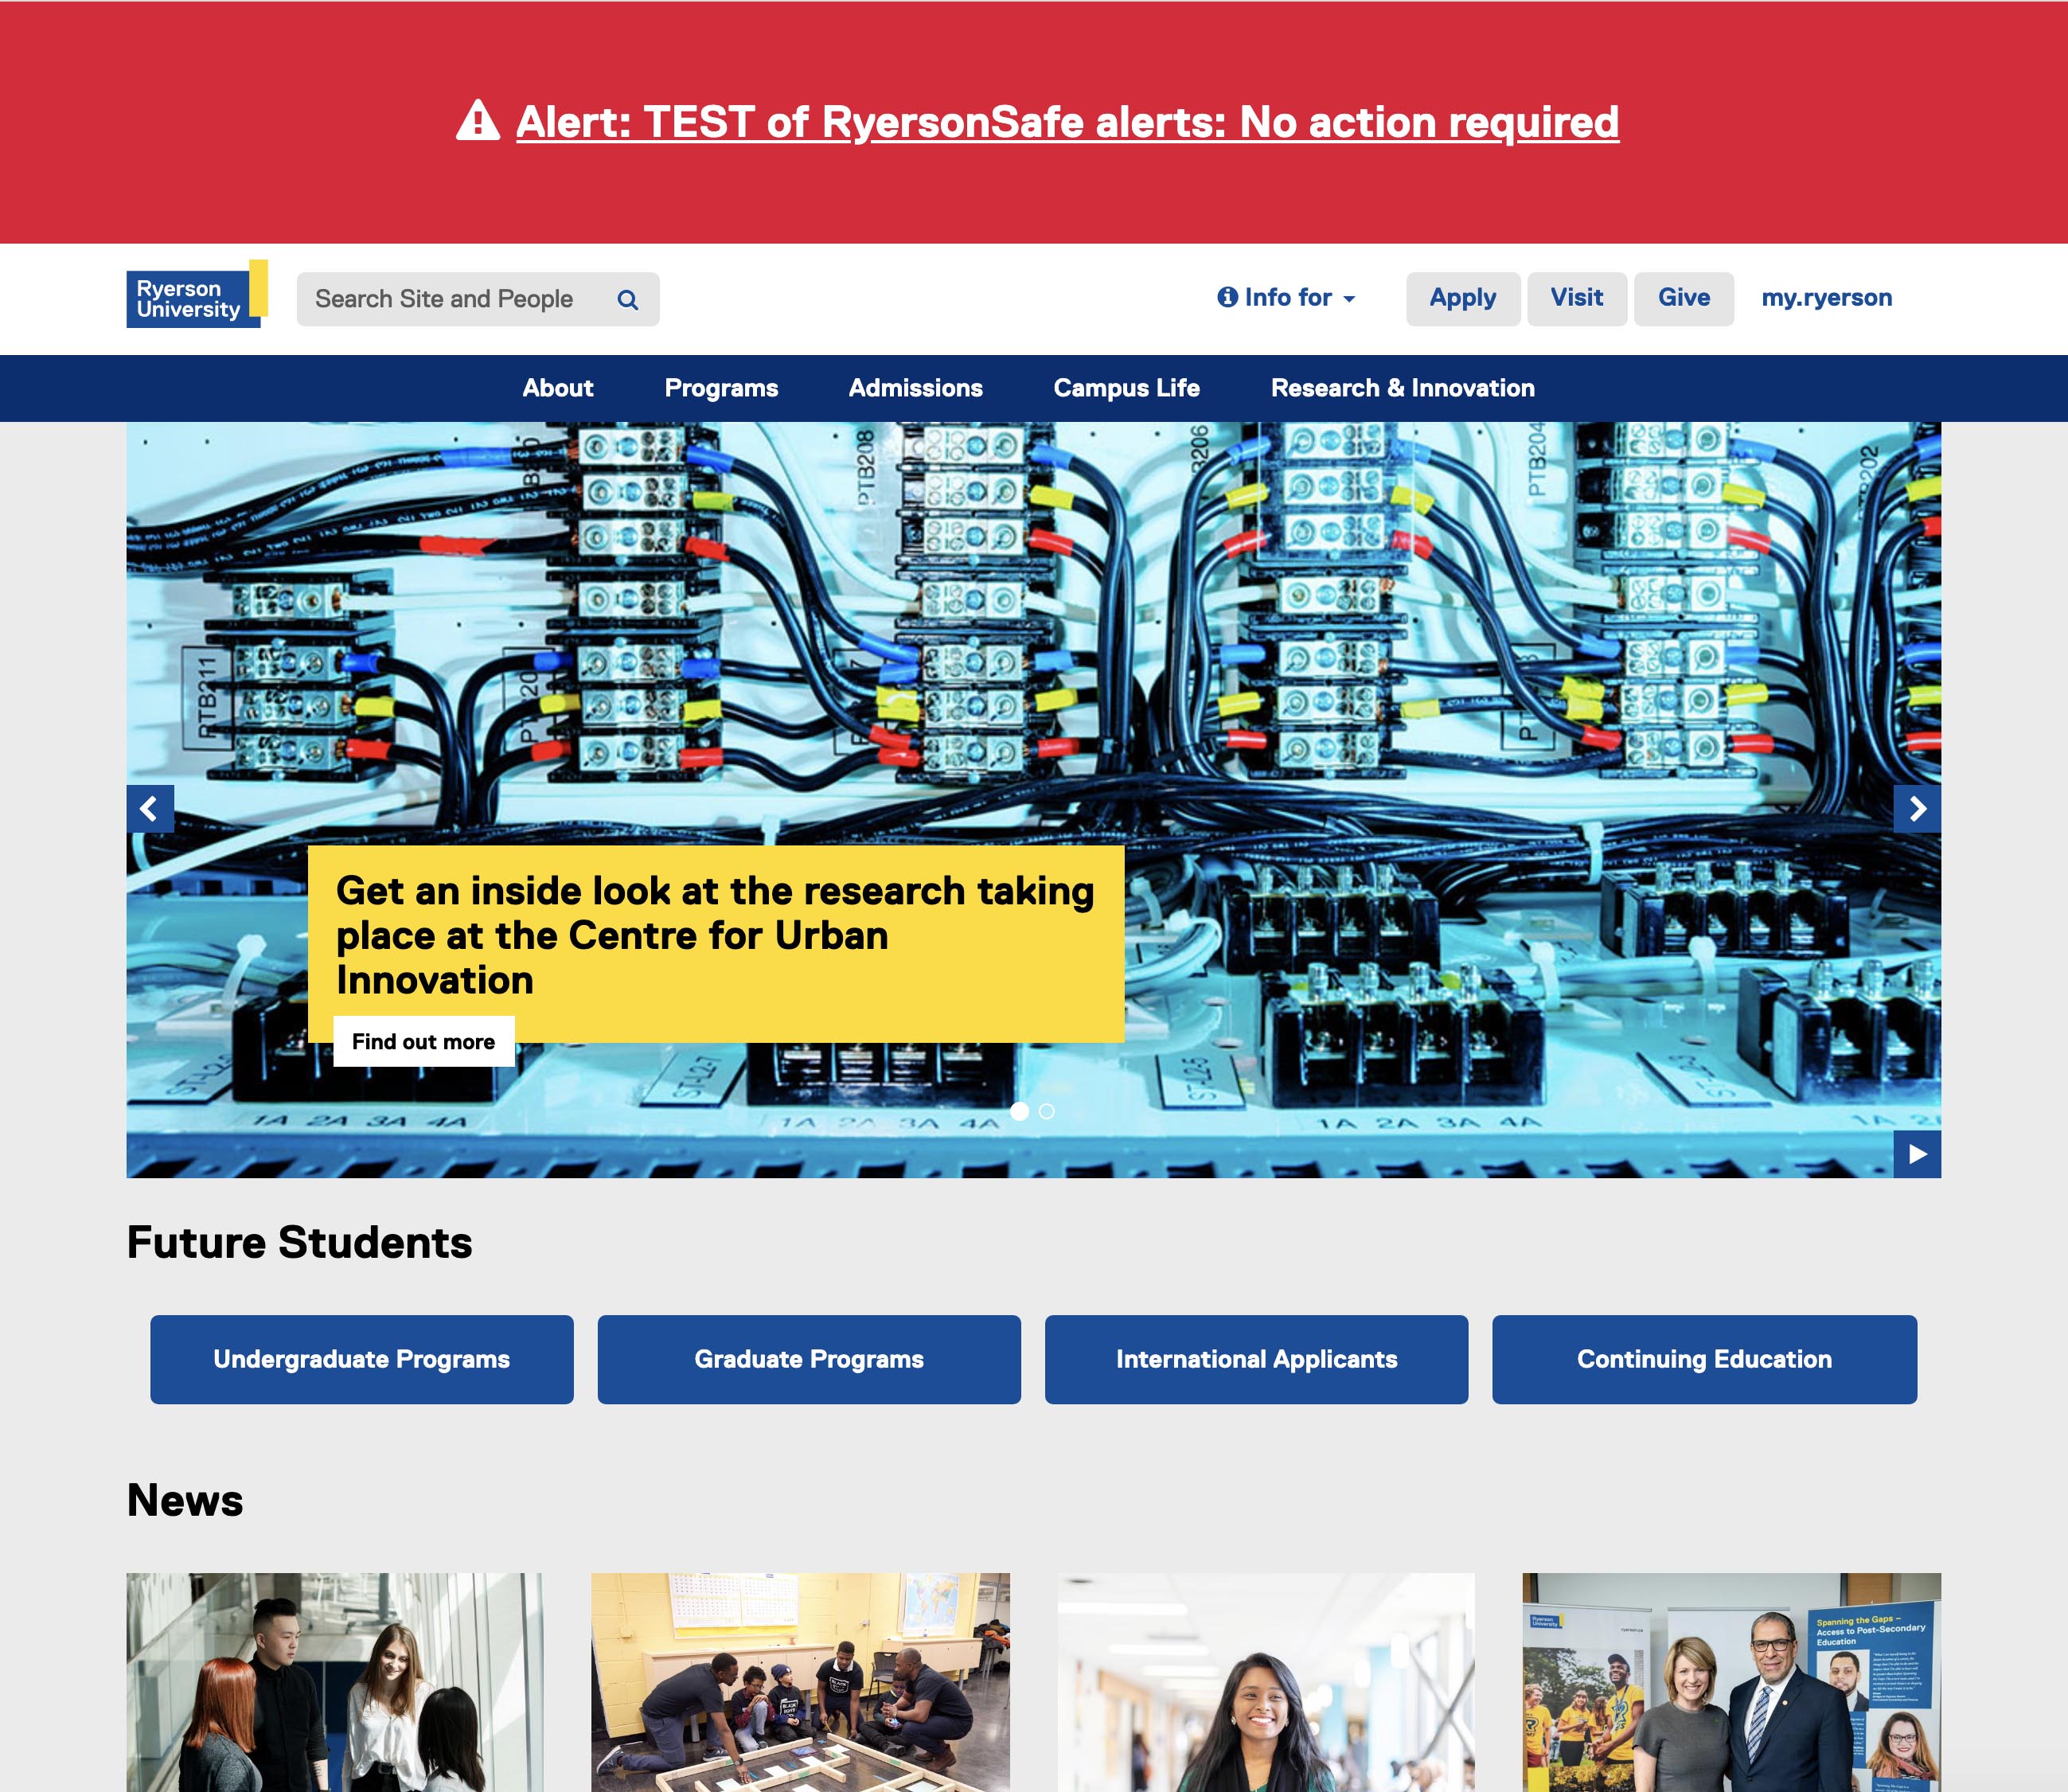 The Ryerson website homepage with a red alert bar at the top of the page.